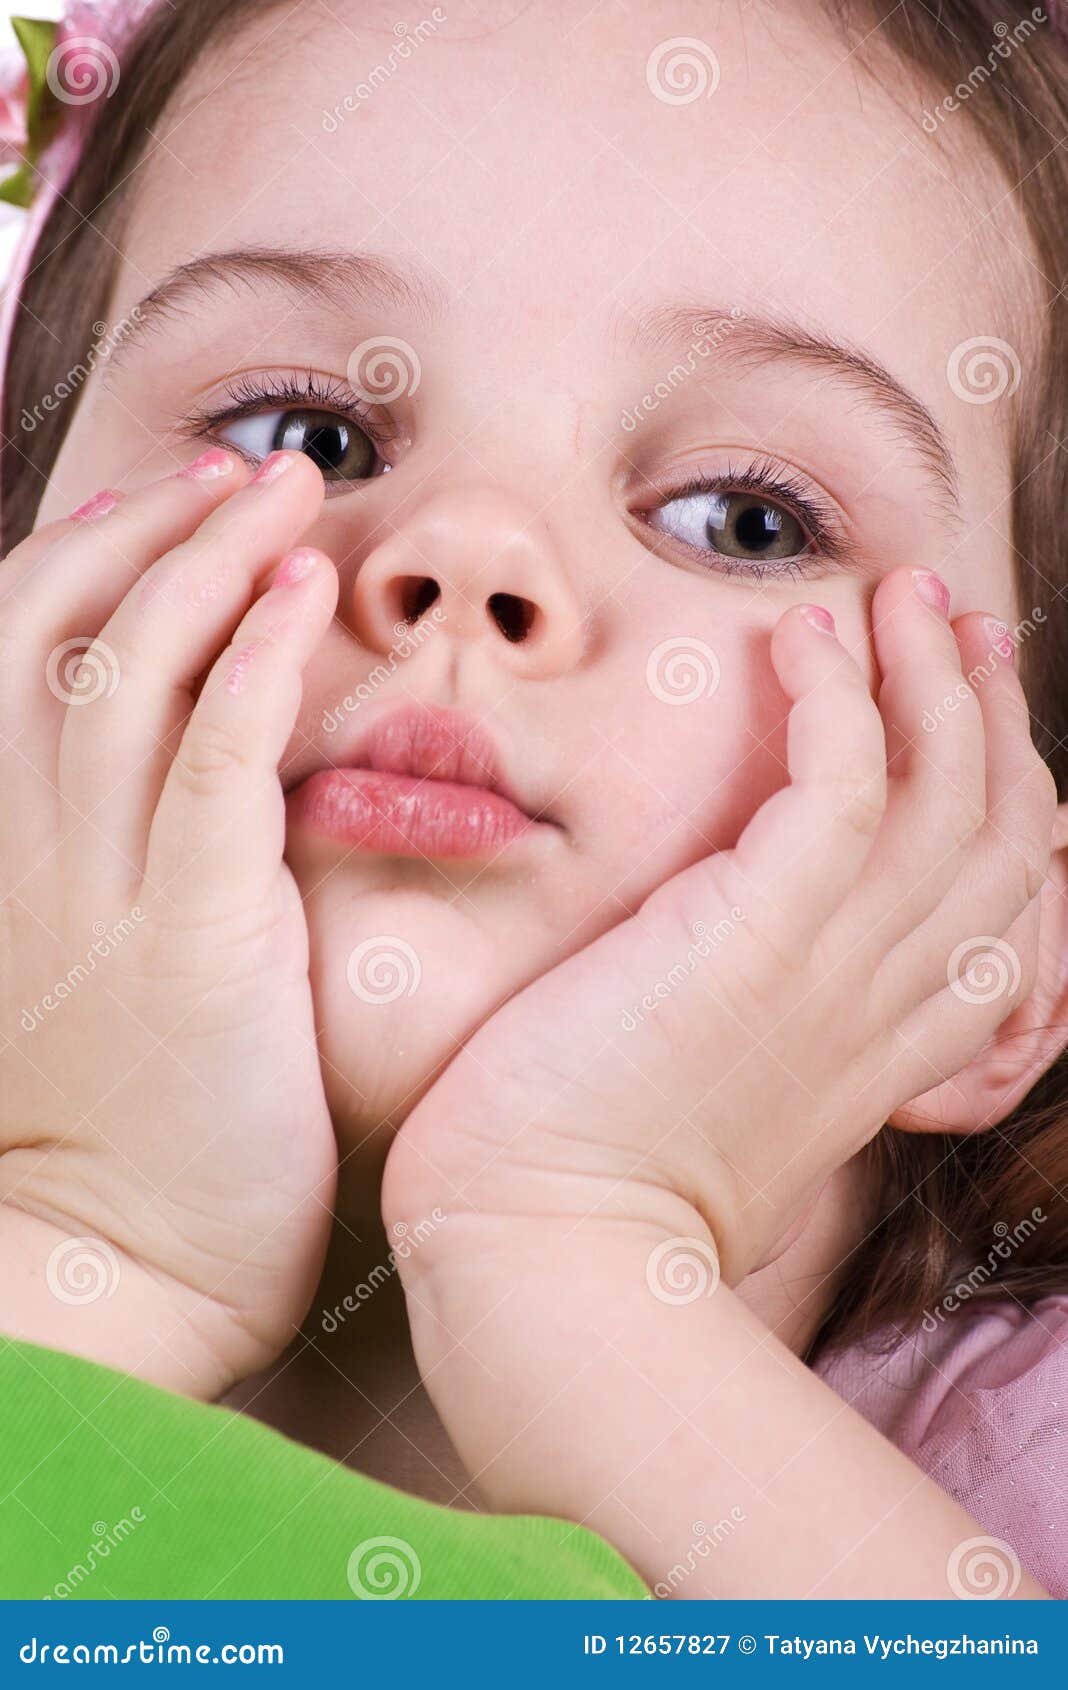 Cute Sad Little Girl Close-up Stock Image - Image of expression ...